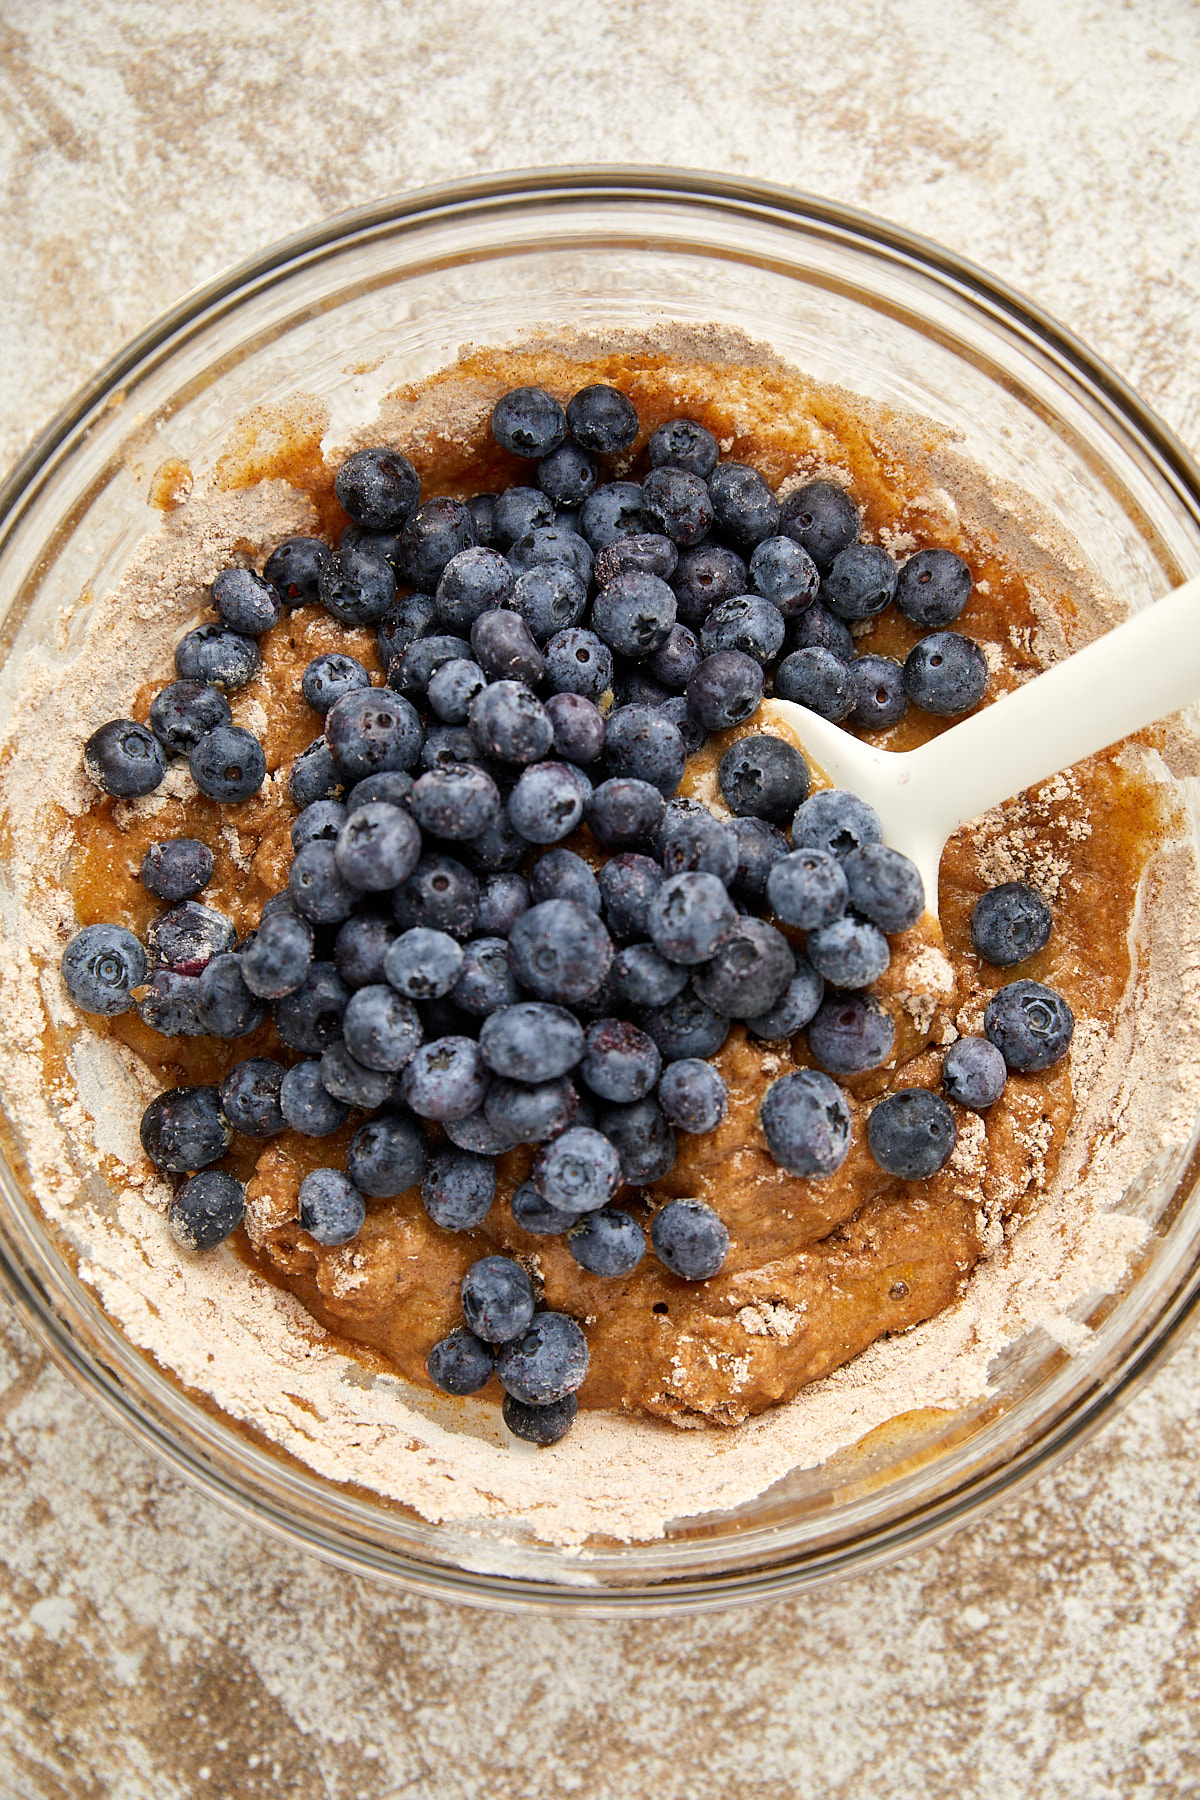 dry and wet ingredients in a clear bowl with blueberries on top.